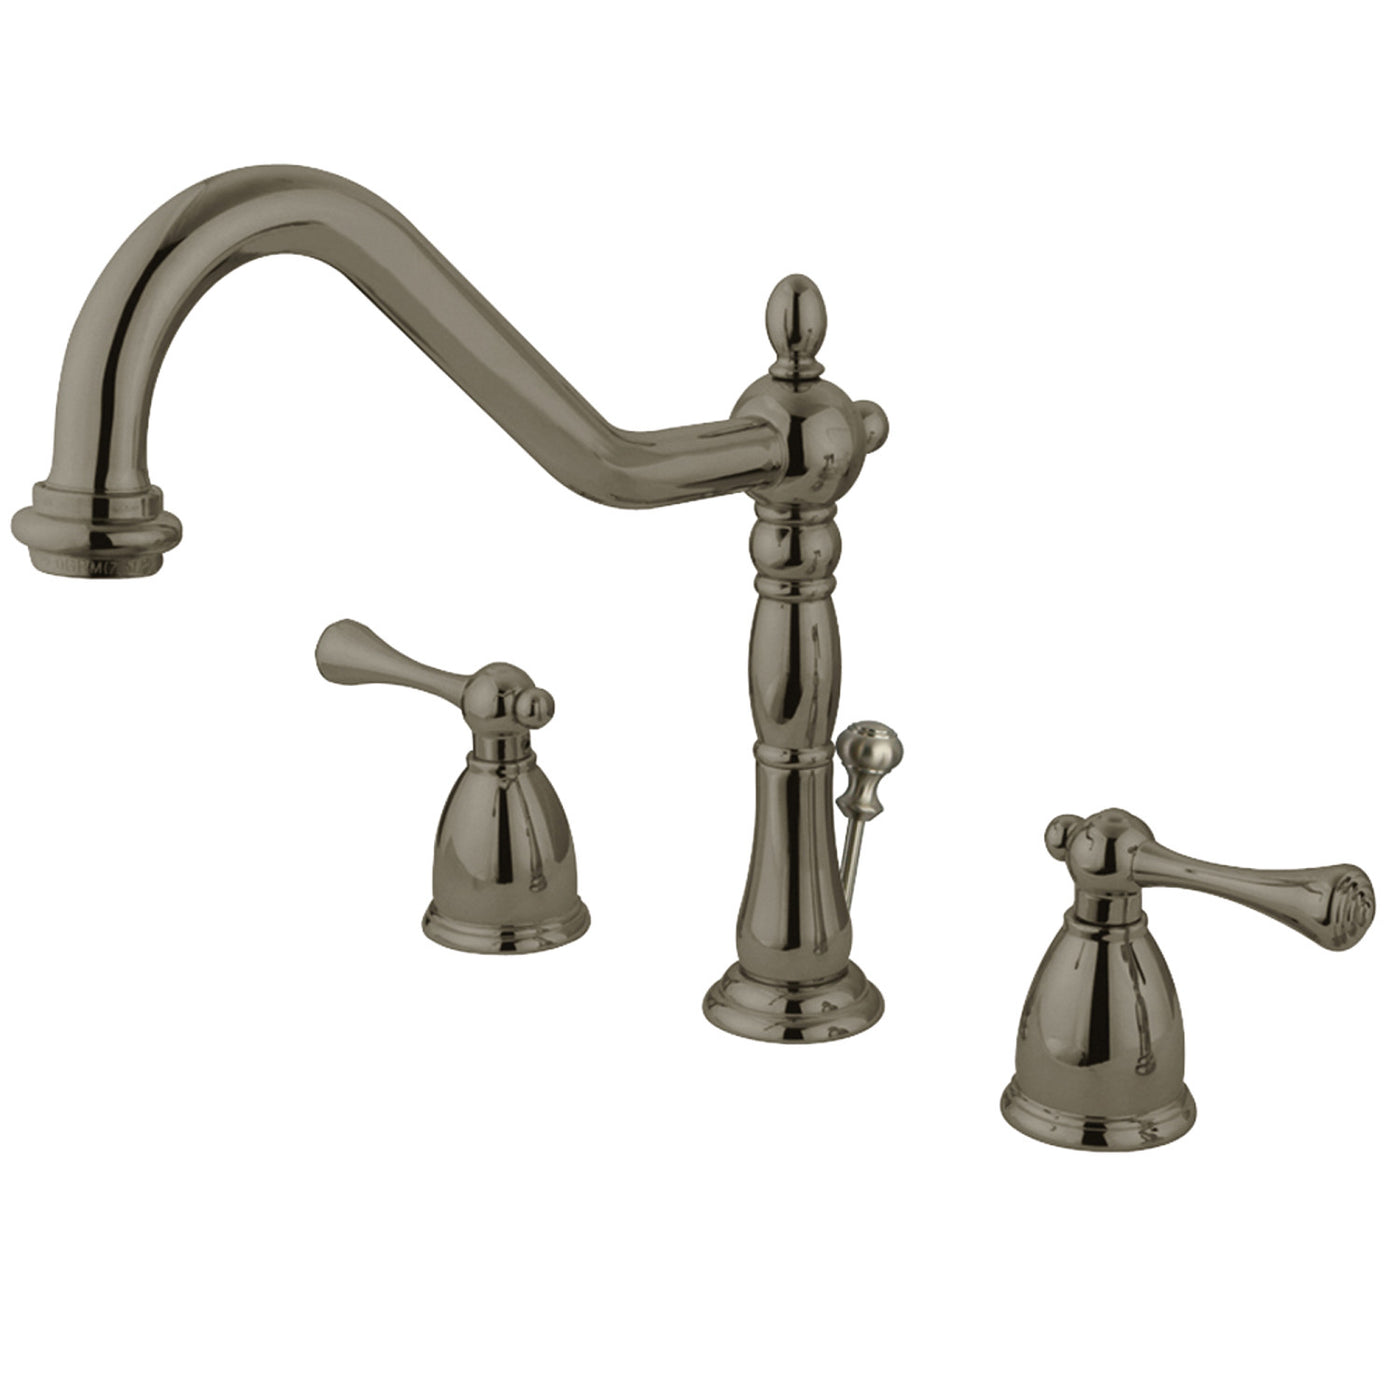 Elements of Design EB7978BL Widespread Bathroom Faucet with Retail Pop-Up, Brushed Nickel